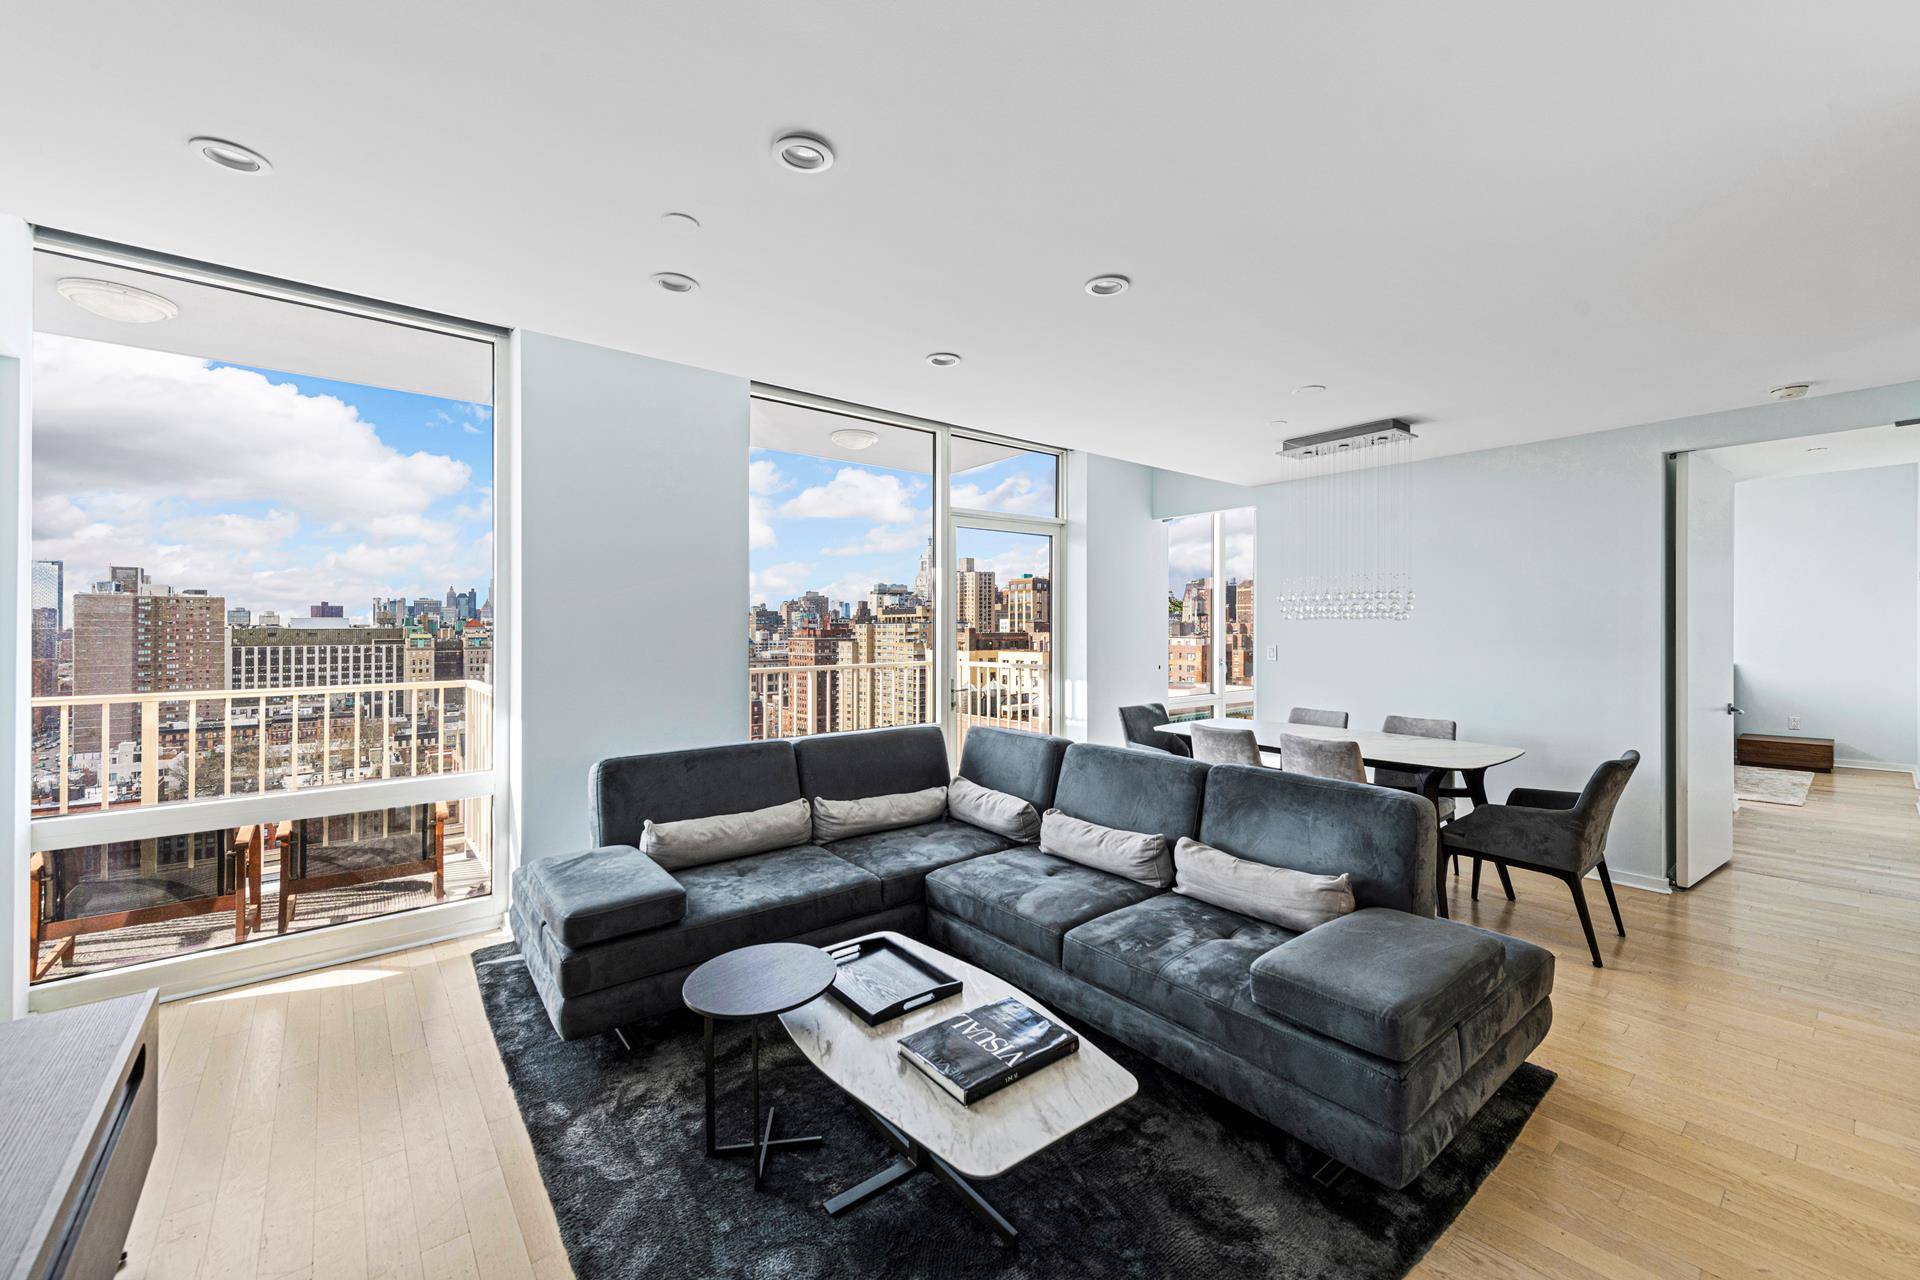 This stunning south facing penthouse at the Gramercy Starck condominium boasts a perfect split two bedroom, two bathroom layout with breathtaking views of the city skyline from all windows and ...